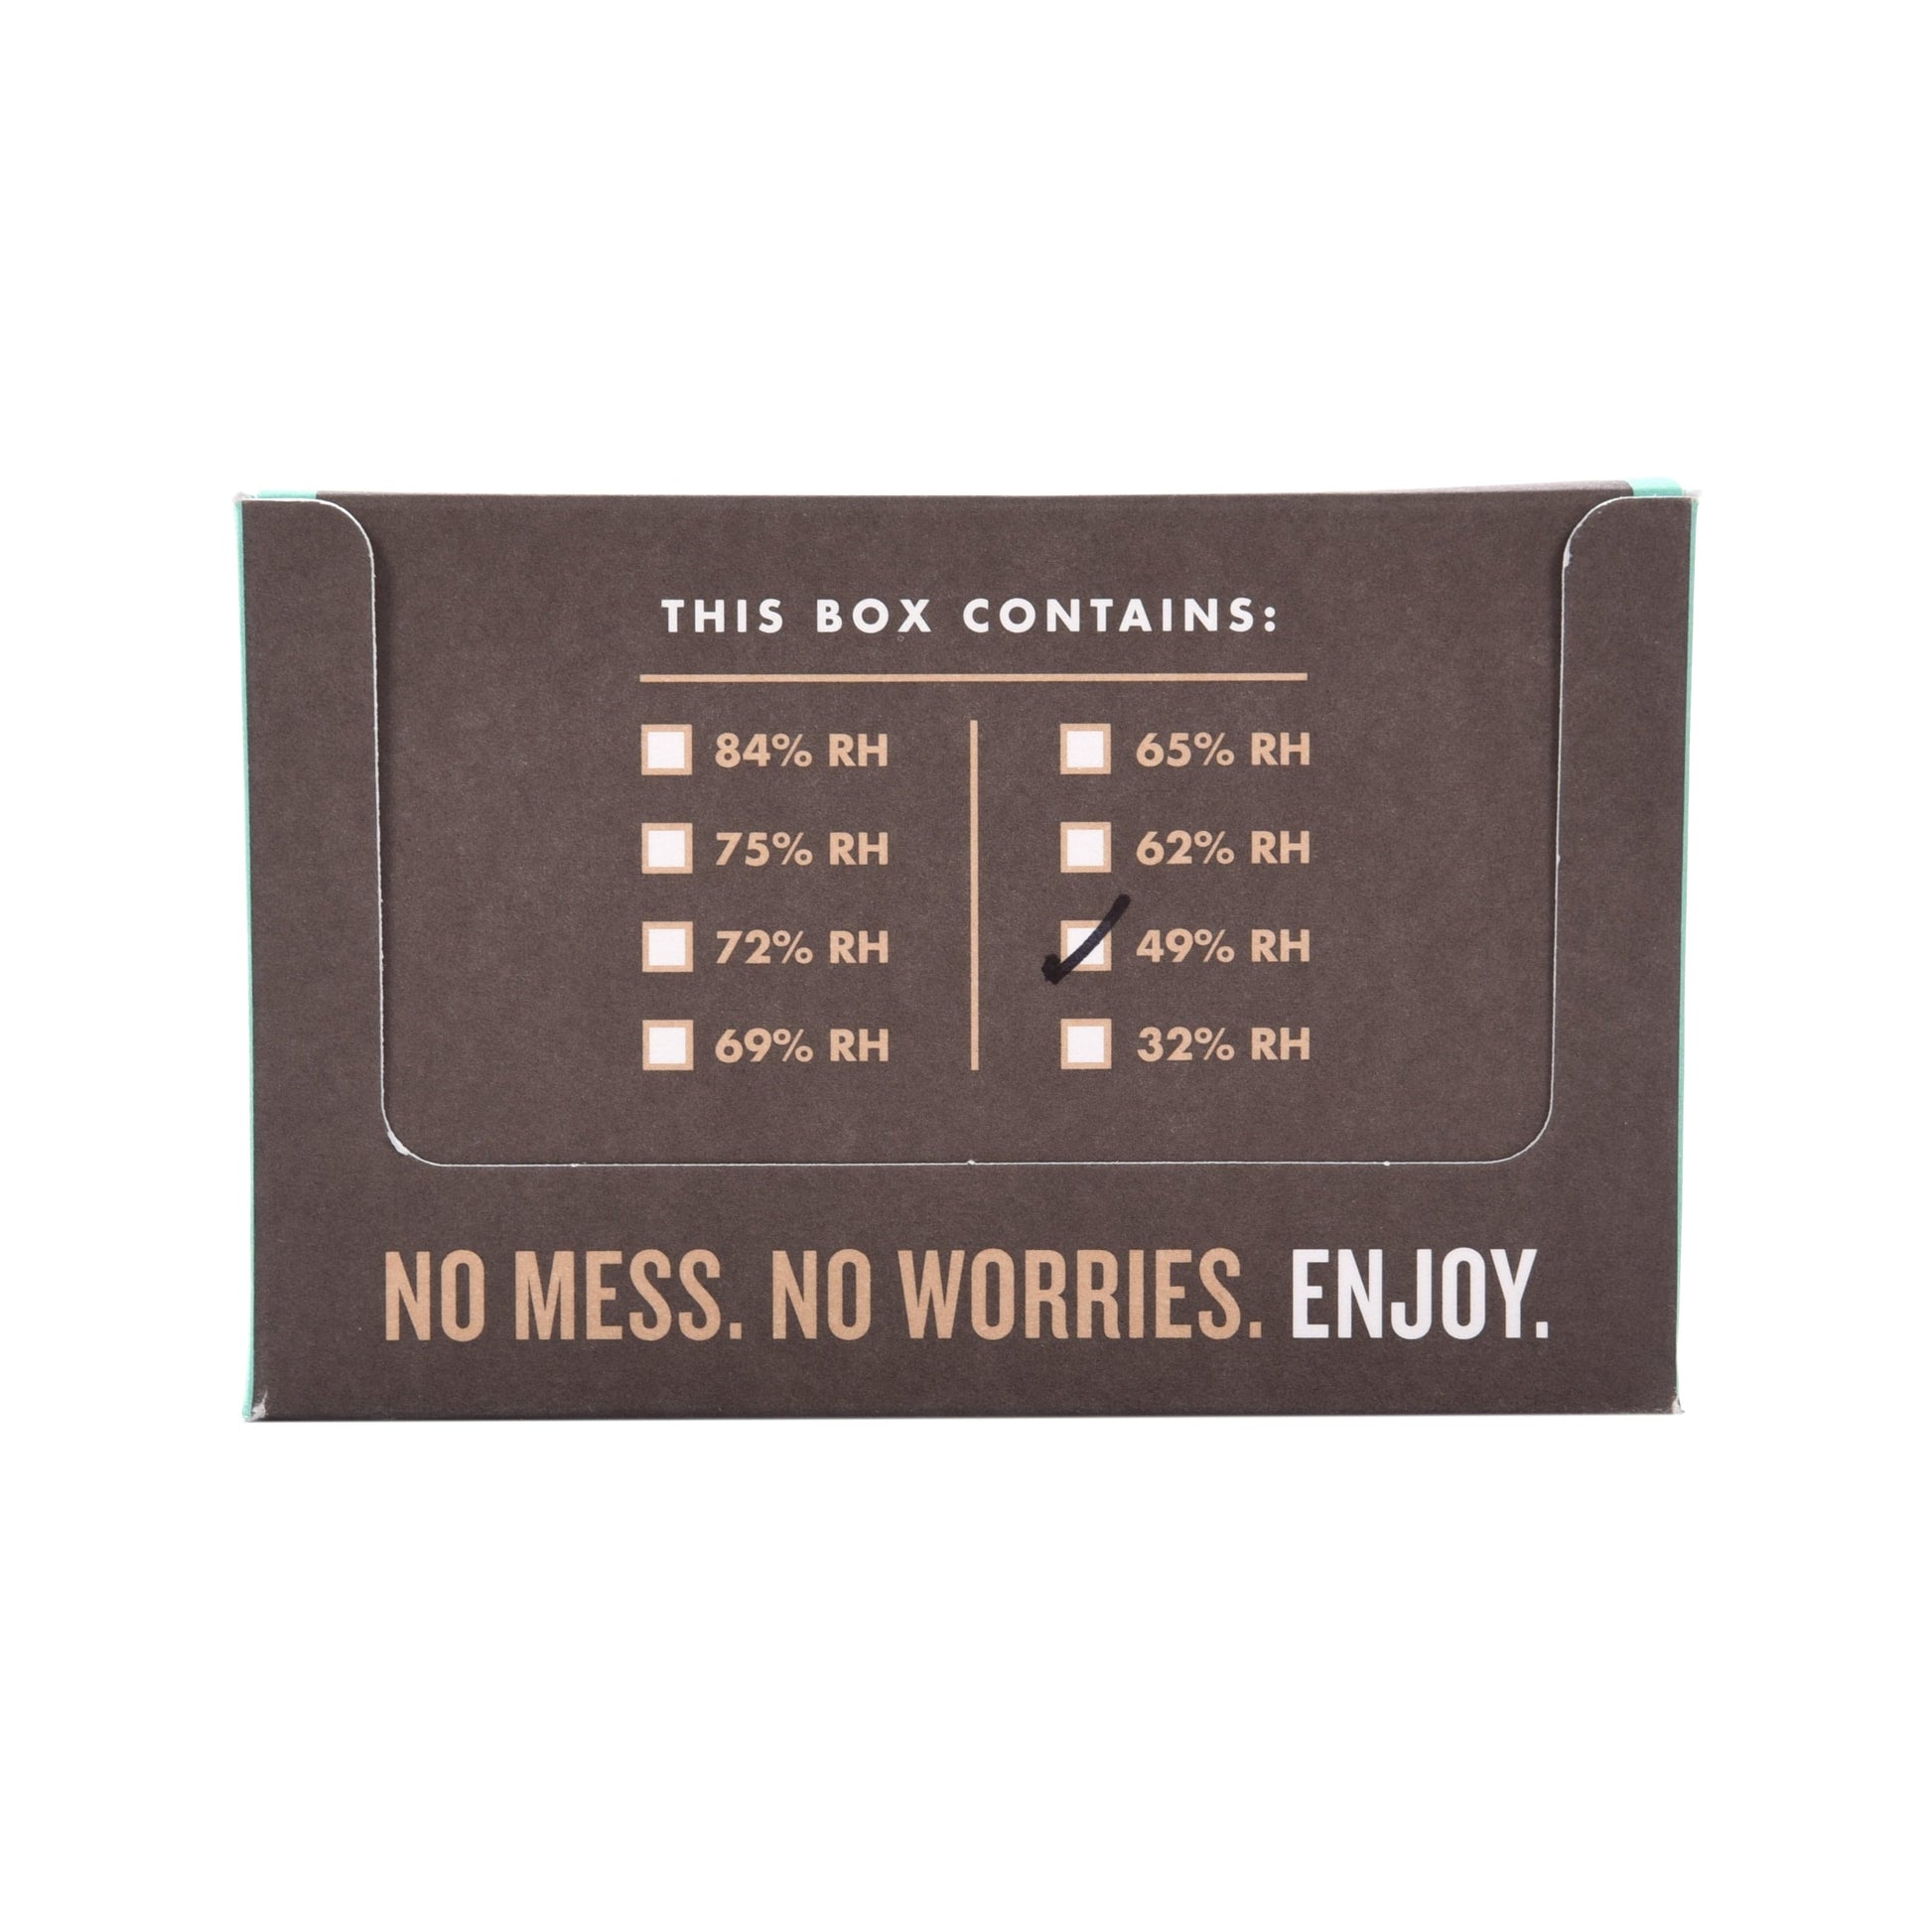 Boveda 2-Way Humidity Control 12-Pack Retail Carton 49% RH Size 70 Accessories / Humidifiers